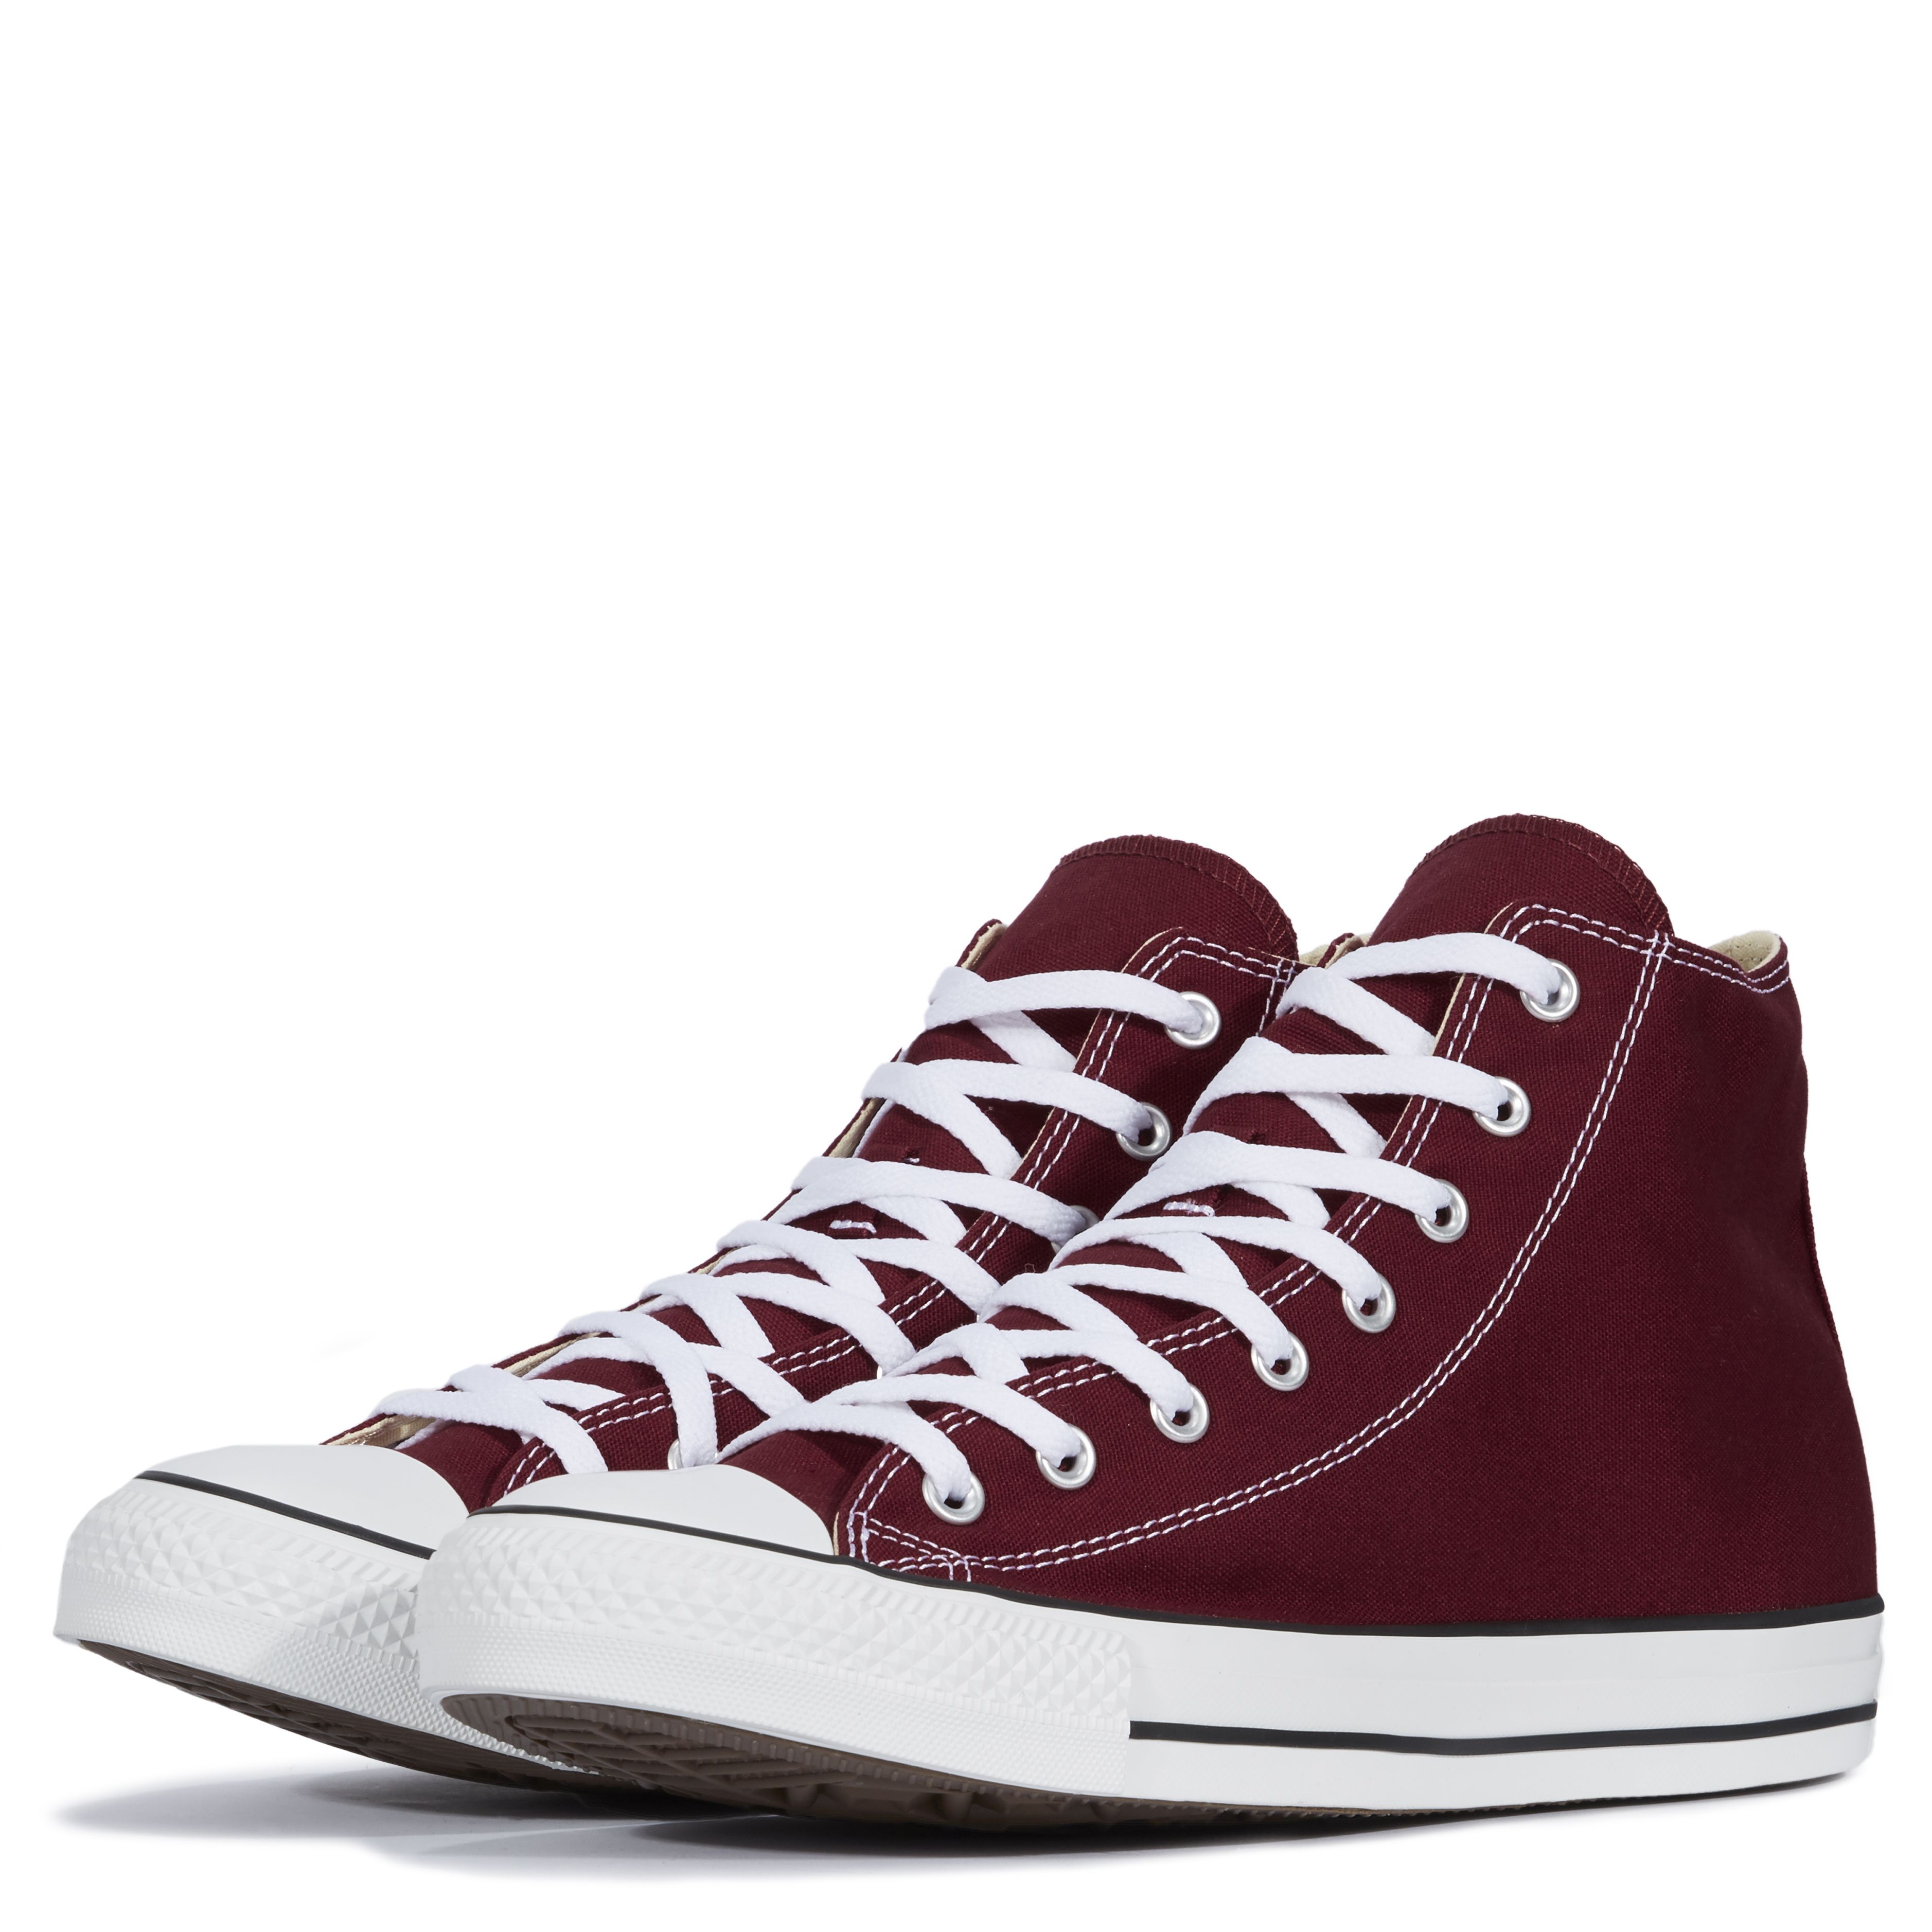 Converse All Star Unisex Chuck Taylor High Top Sneakers - Maroon